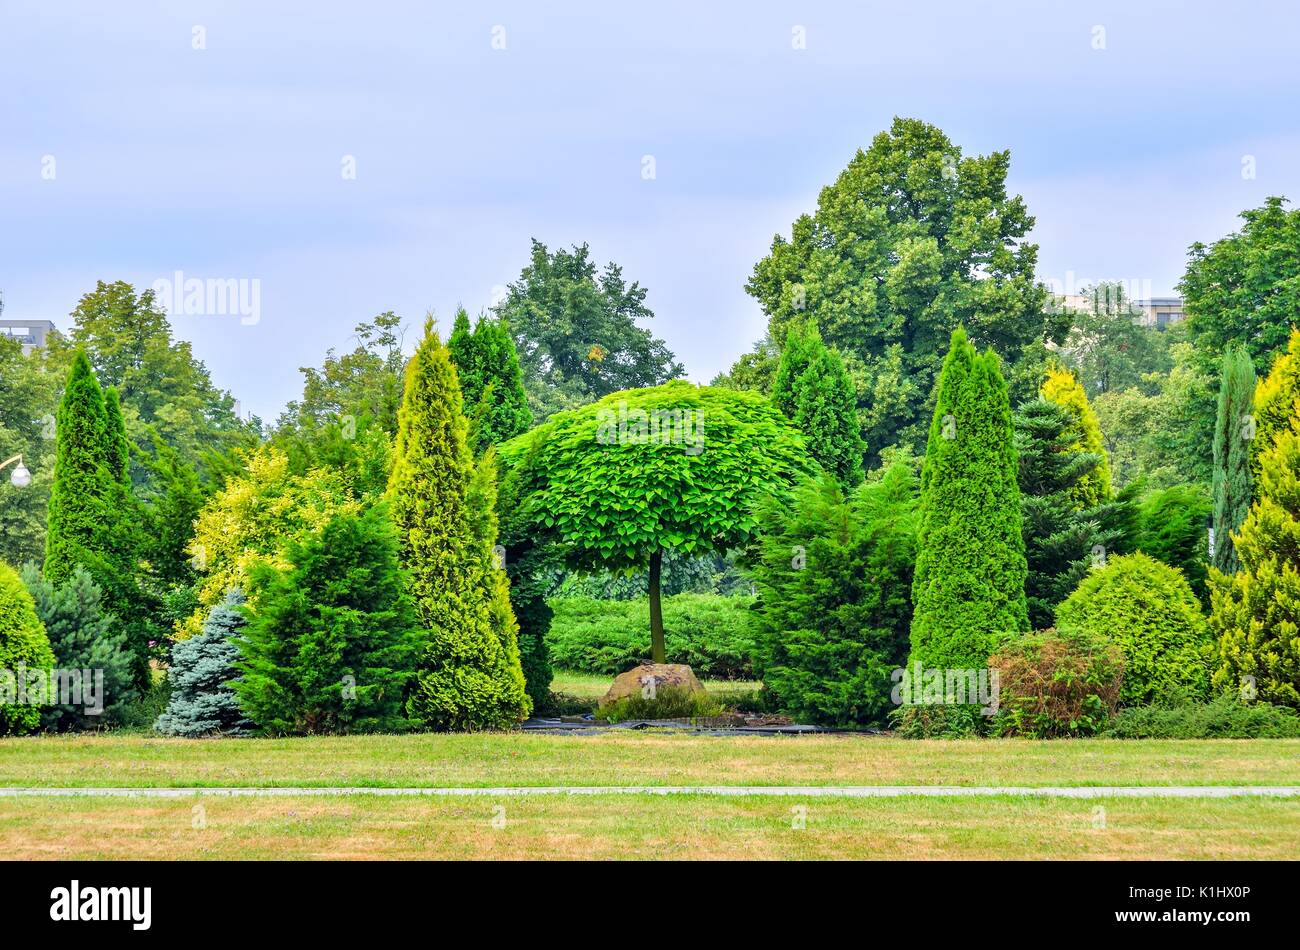 Big Stone Park/garden Flowerpot With Ornament And Evergreen Plant In Garden  Stock Photo, Picture and Royalty Free Image. Image 10606301.